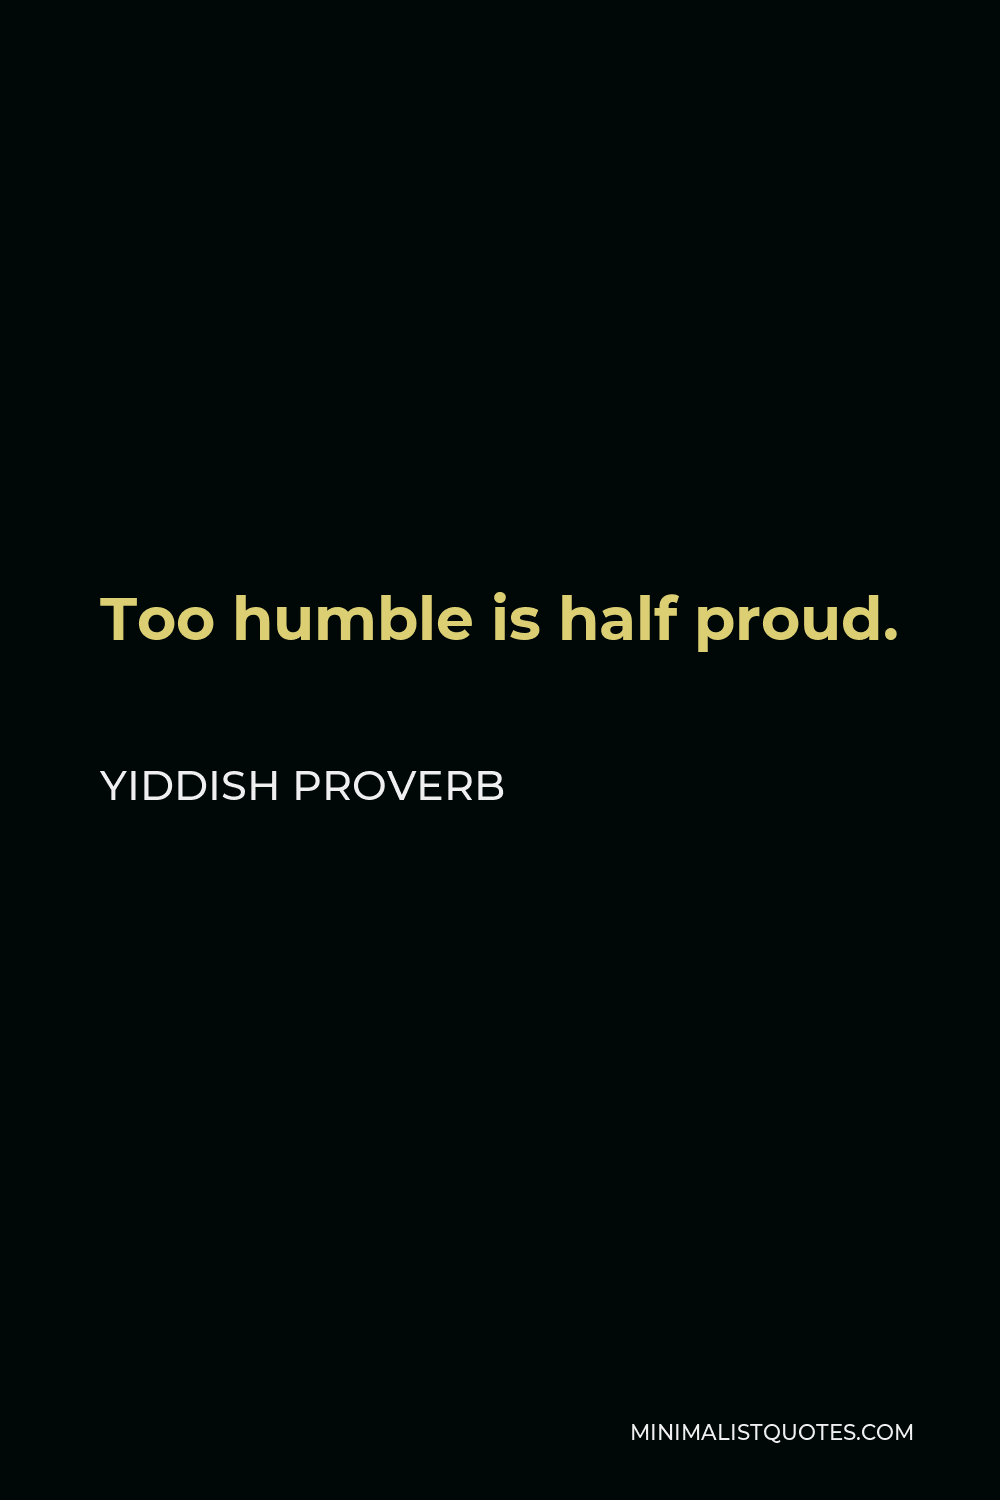 Yiddish Proverb Quote - Too humble is half proud.